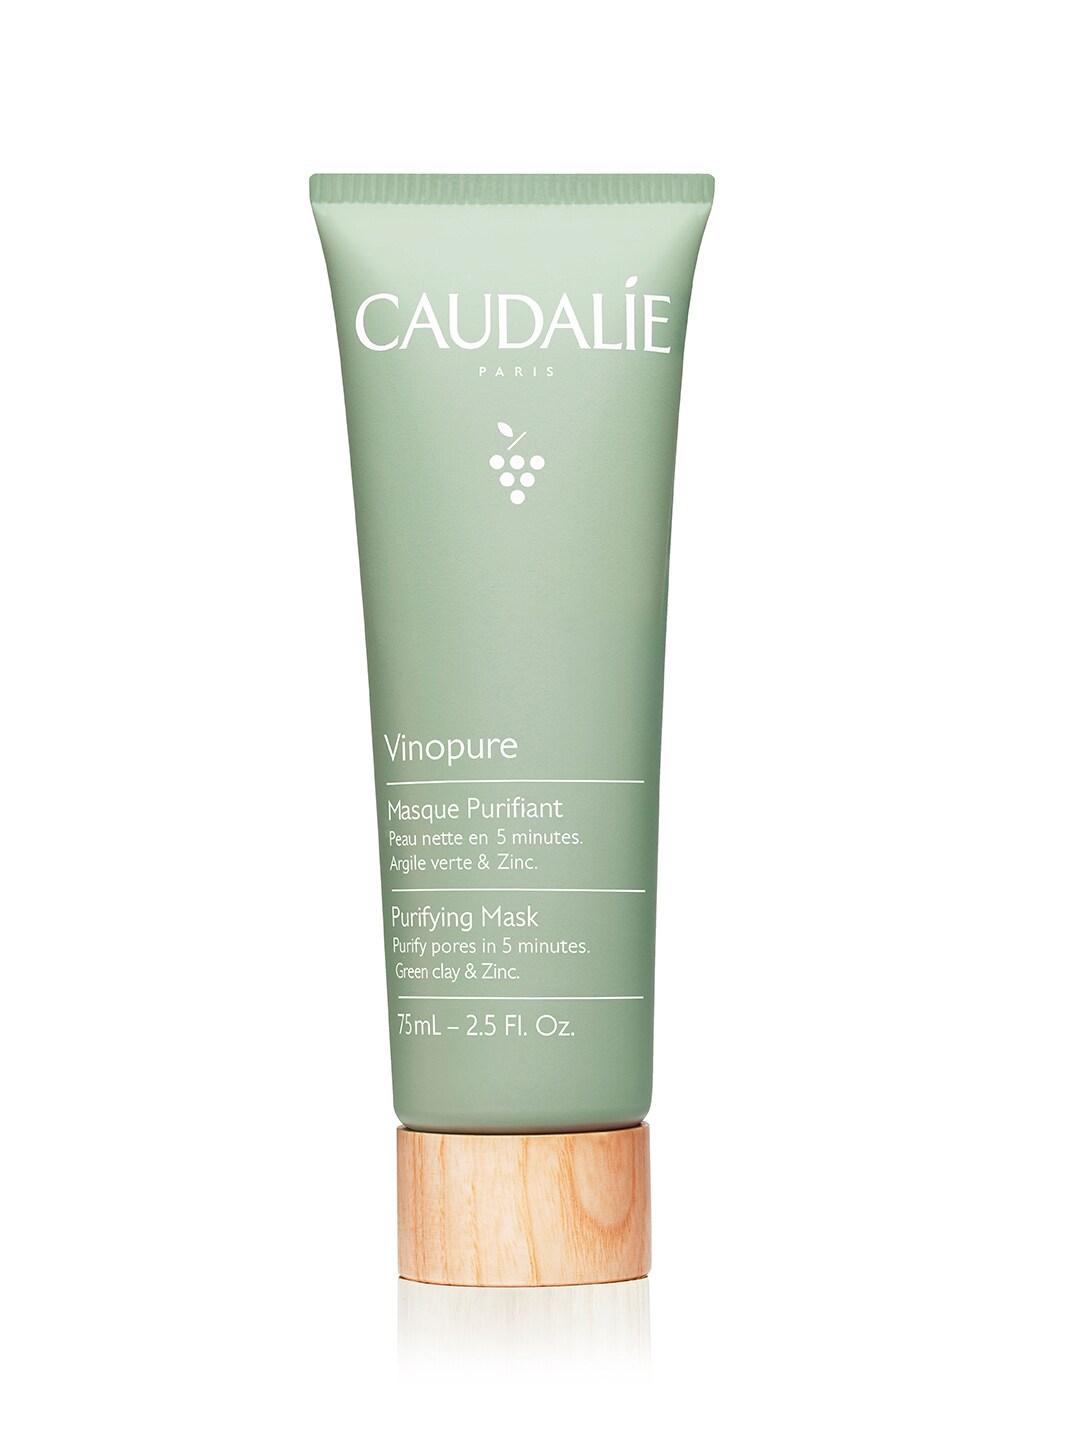 Caudalie Vinopure Purifying Mask with Green Clay & Zinc - 75 ml